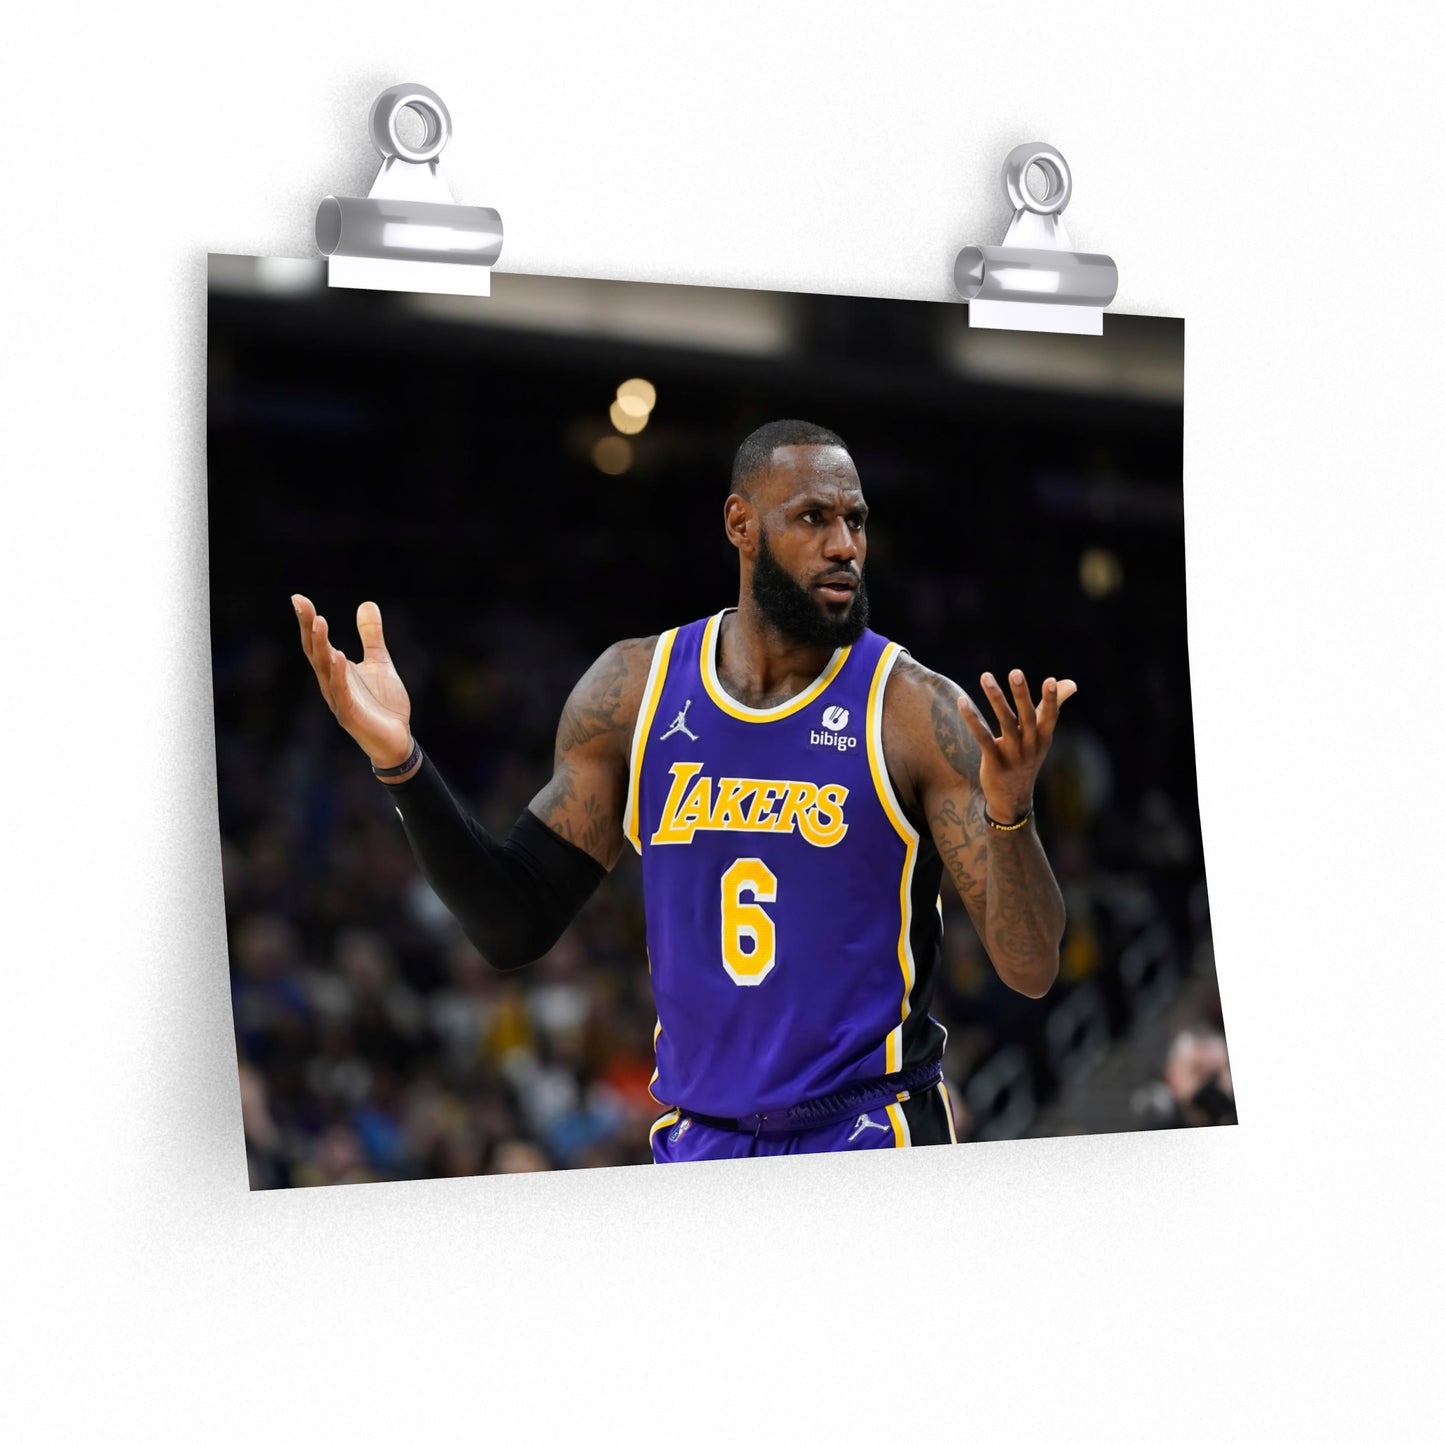 Lebron James Arms Questioning Gesture Los Angeles Lakers 6 Jersey Poster